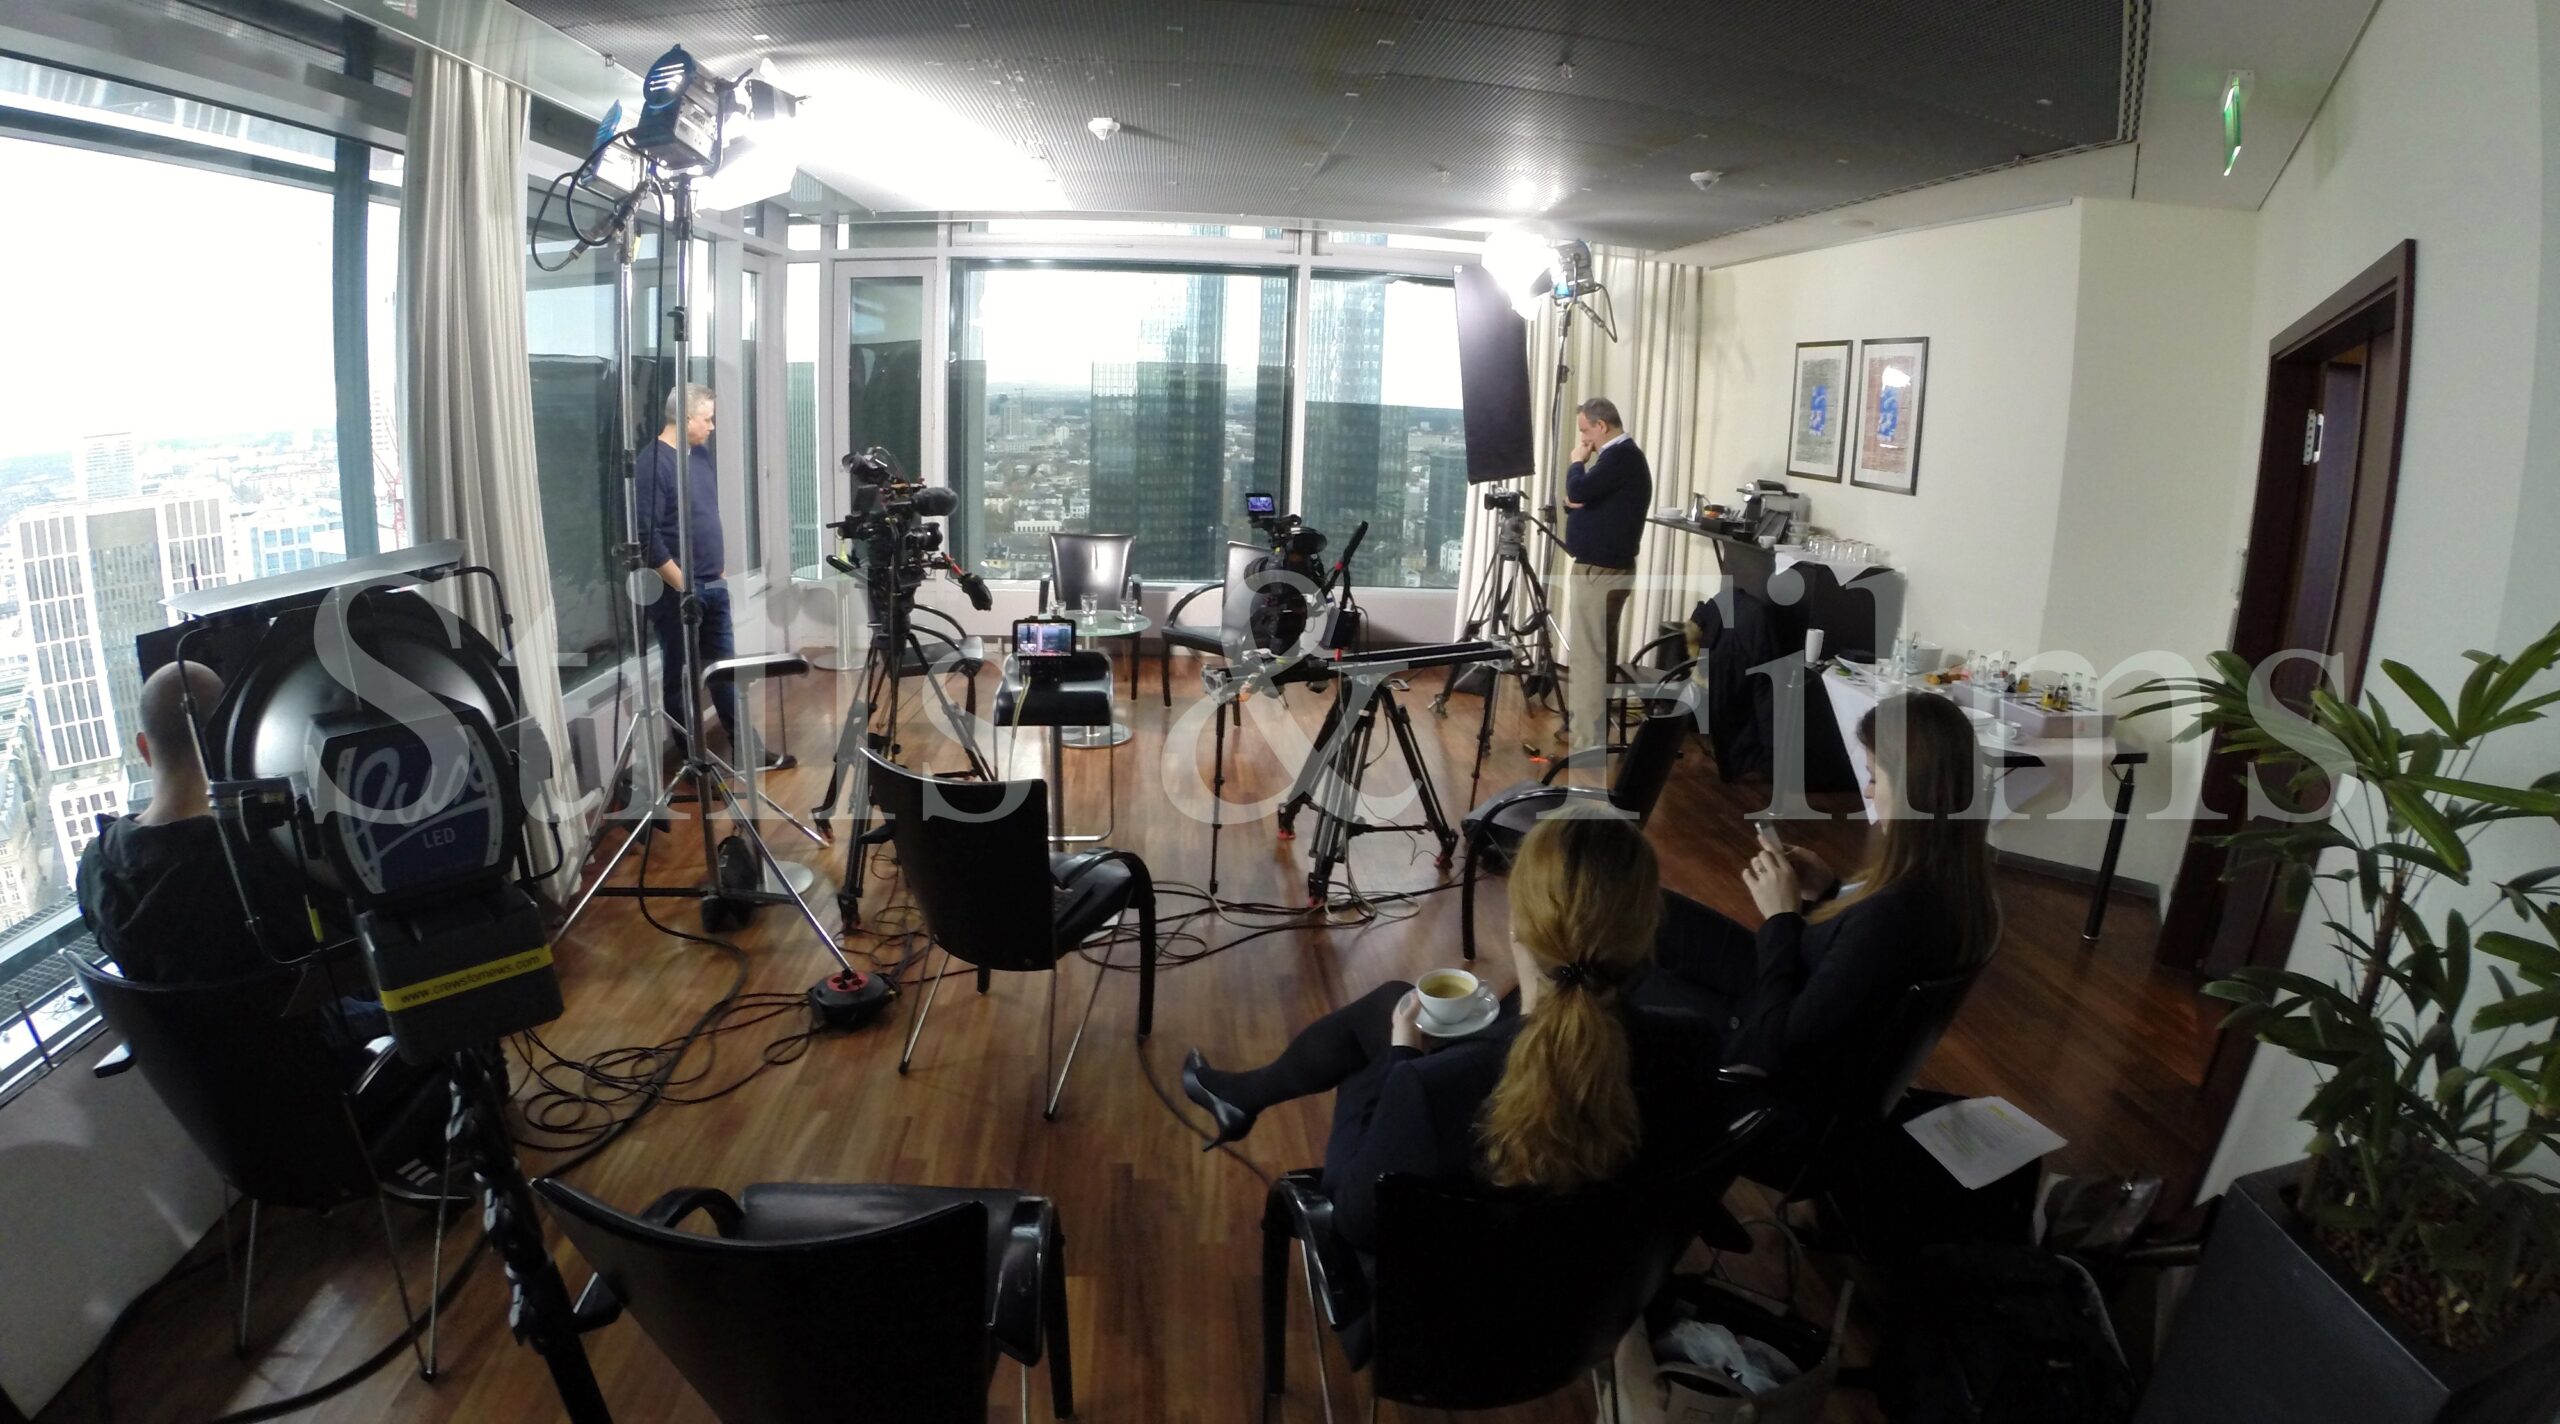 We were on a multi camera production in one of Frankfurt's high rises for a UK production